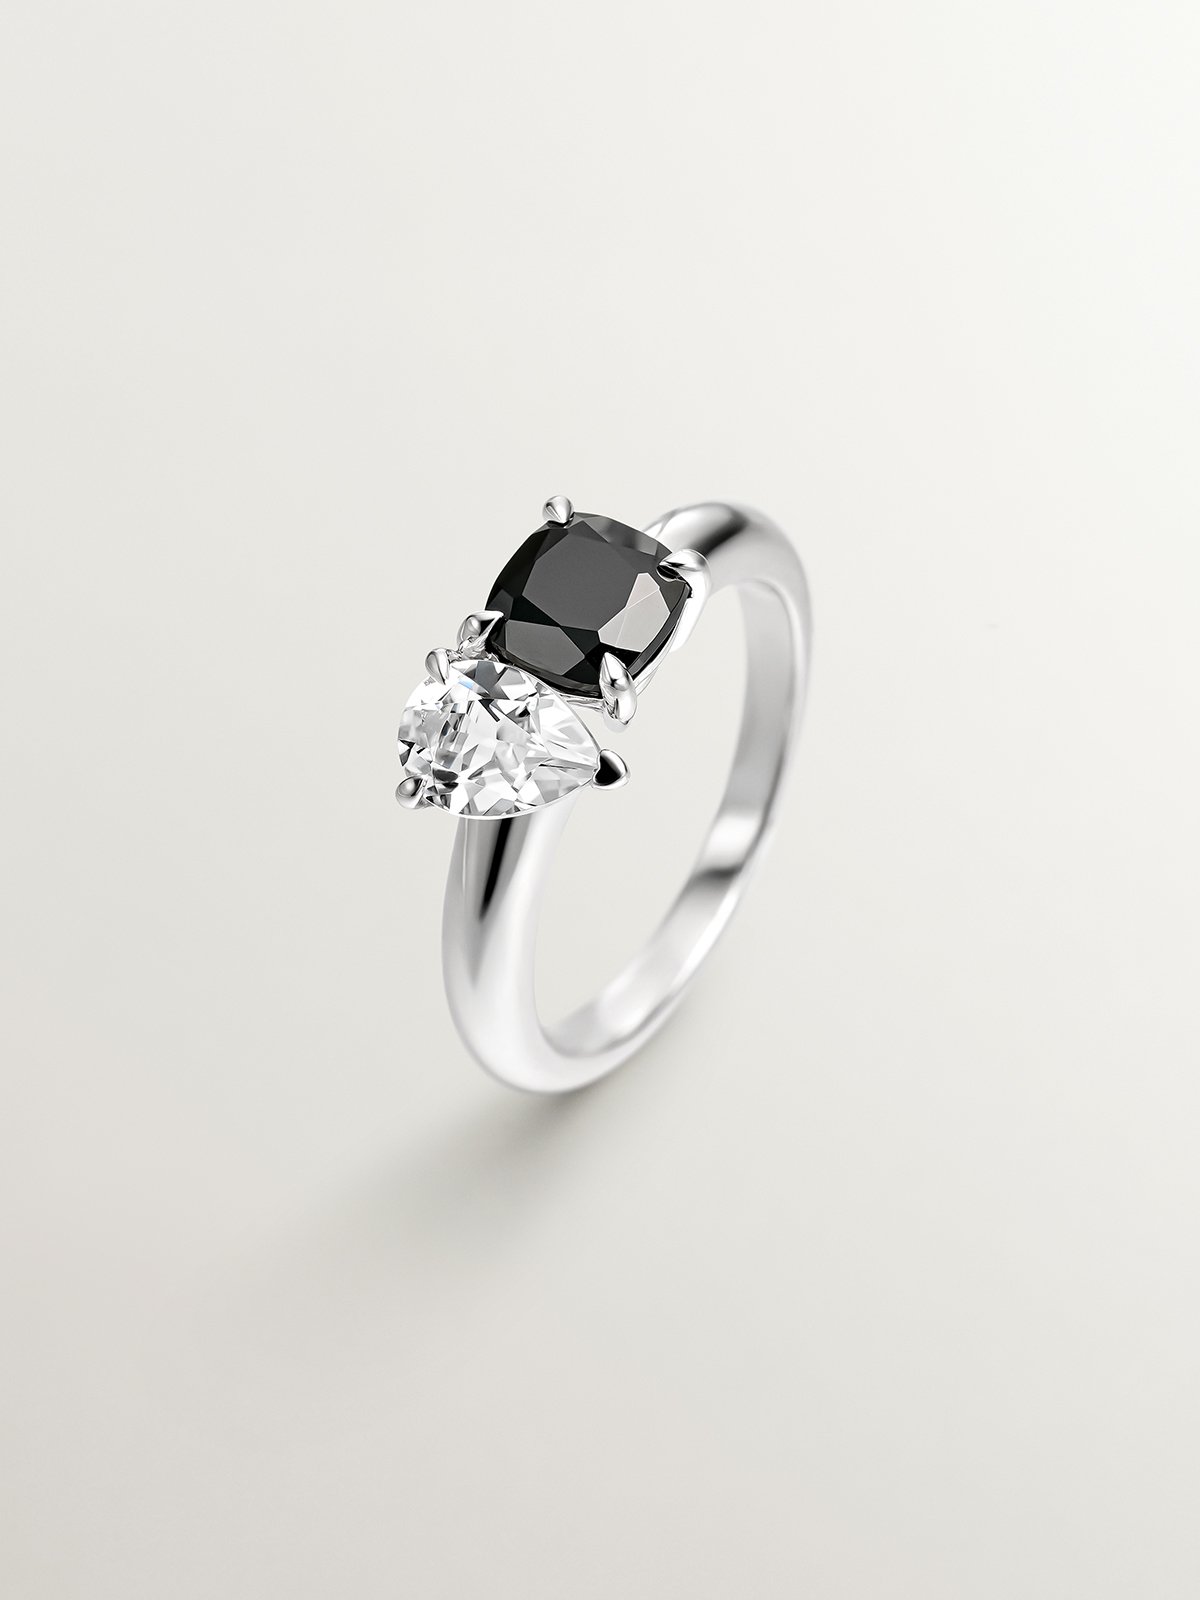 925 silver ring with black spinel and white quartz